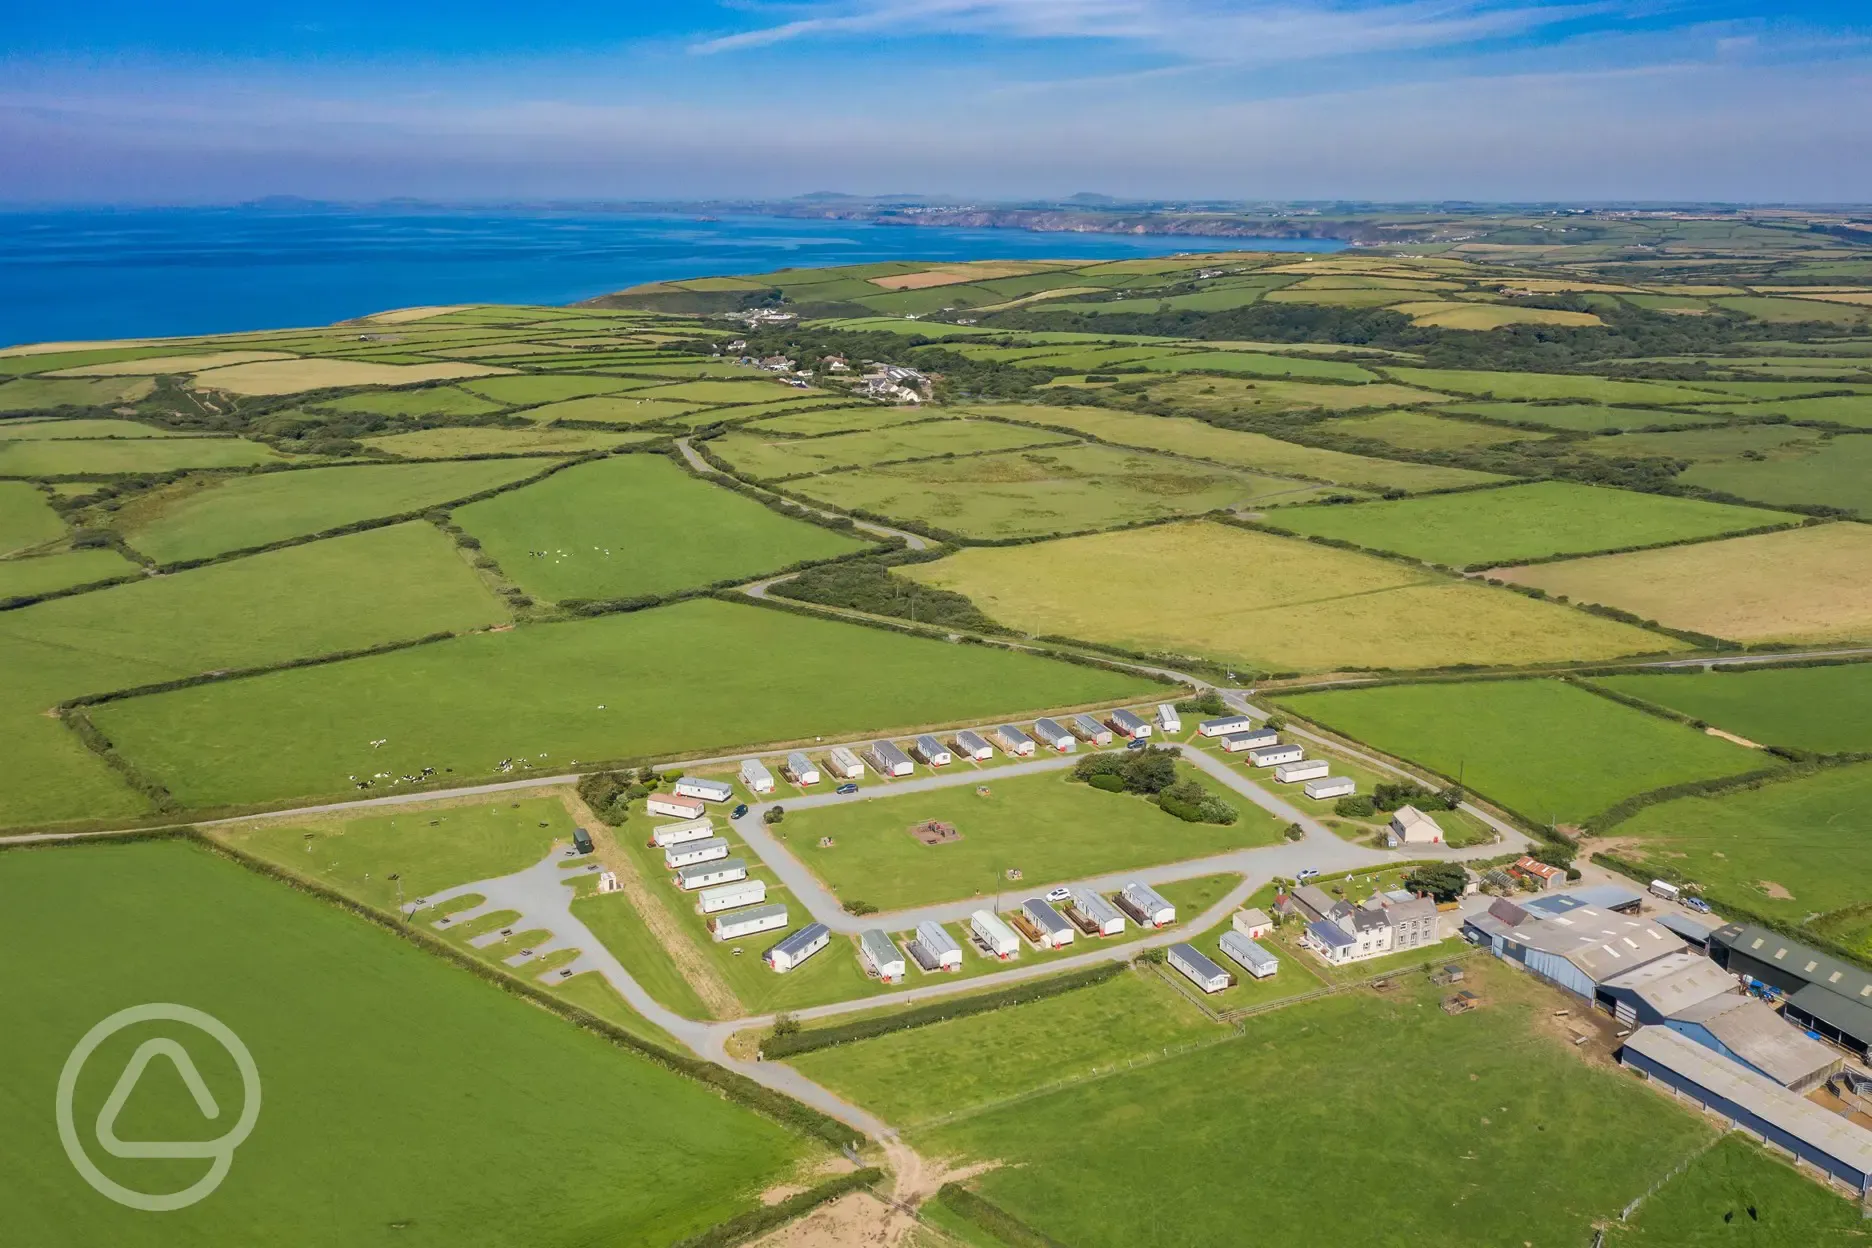 Aerial of the campsite by the sea